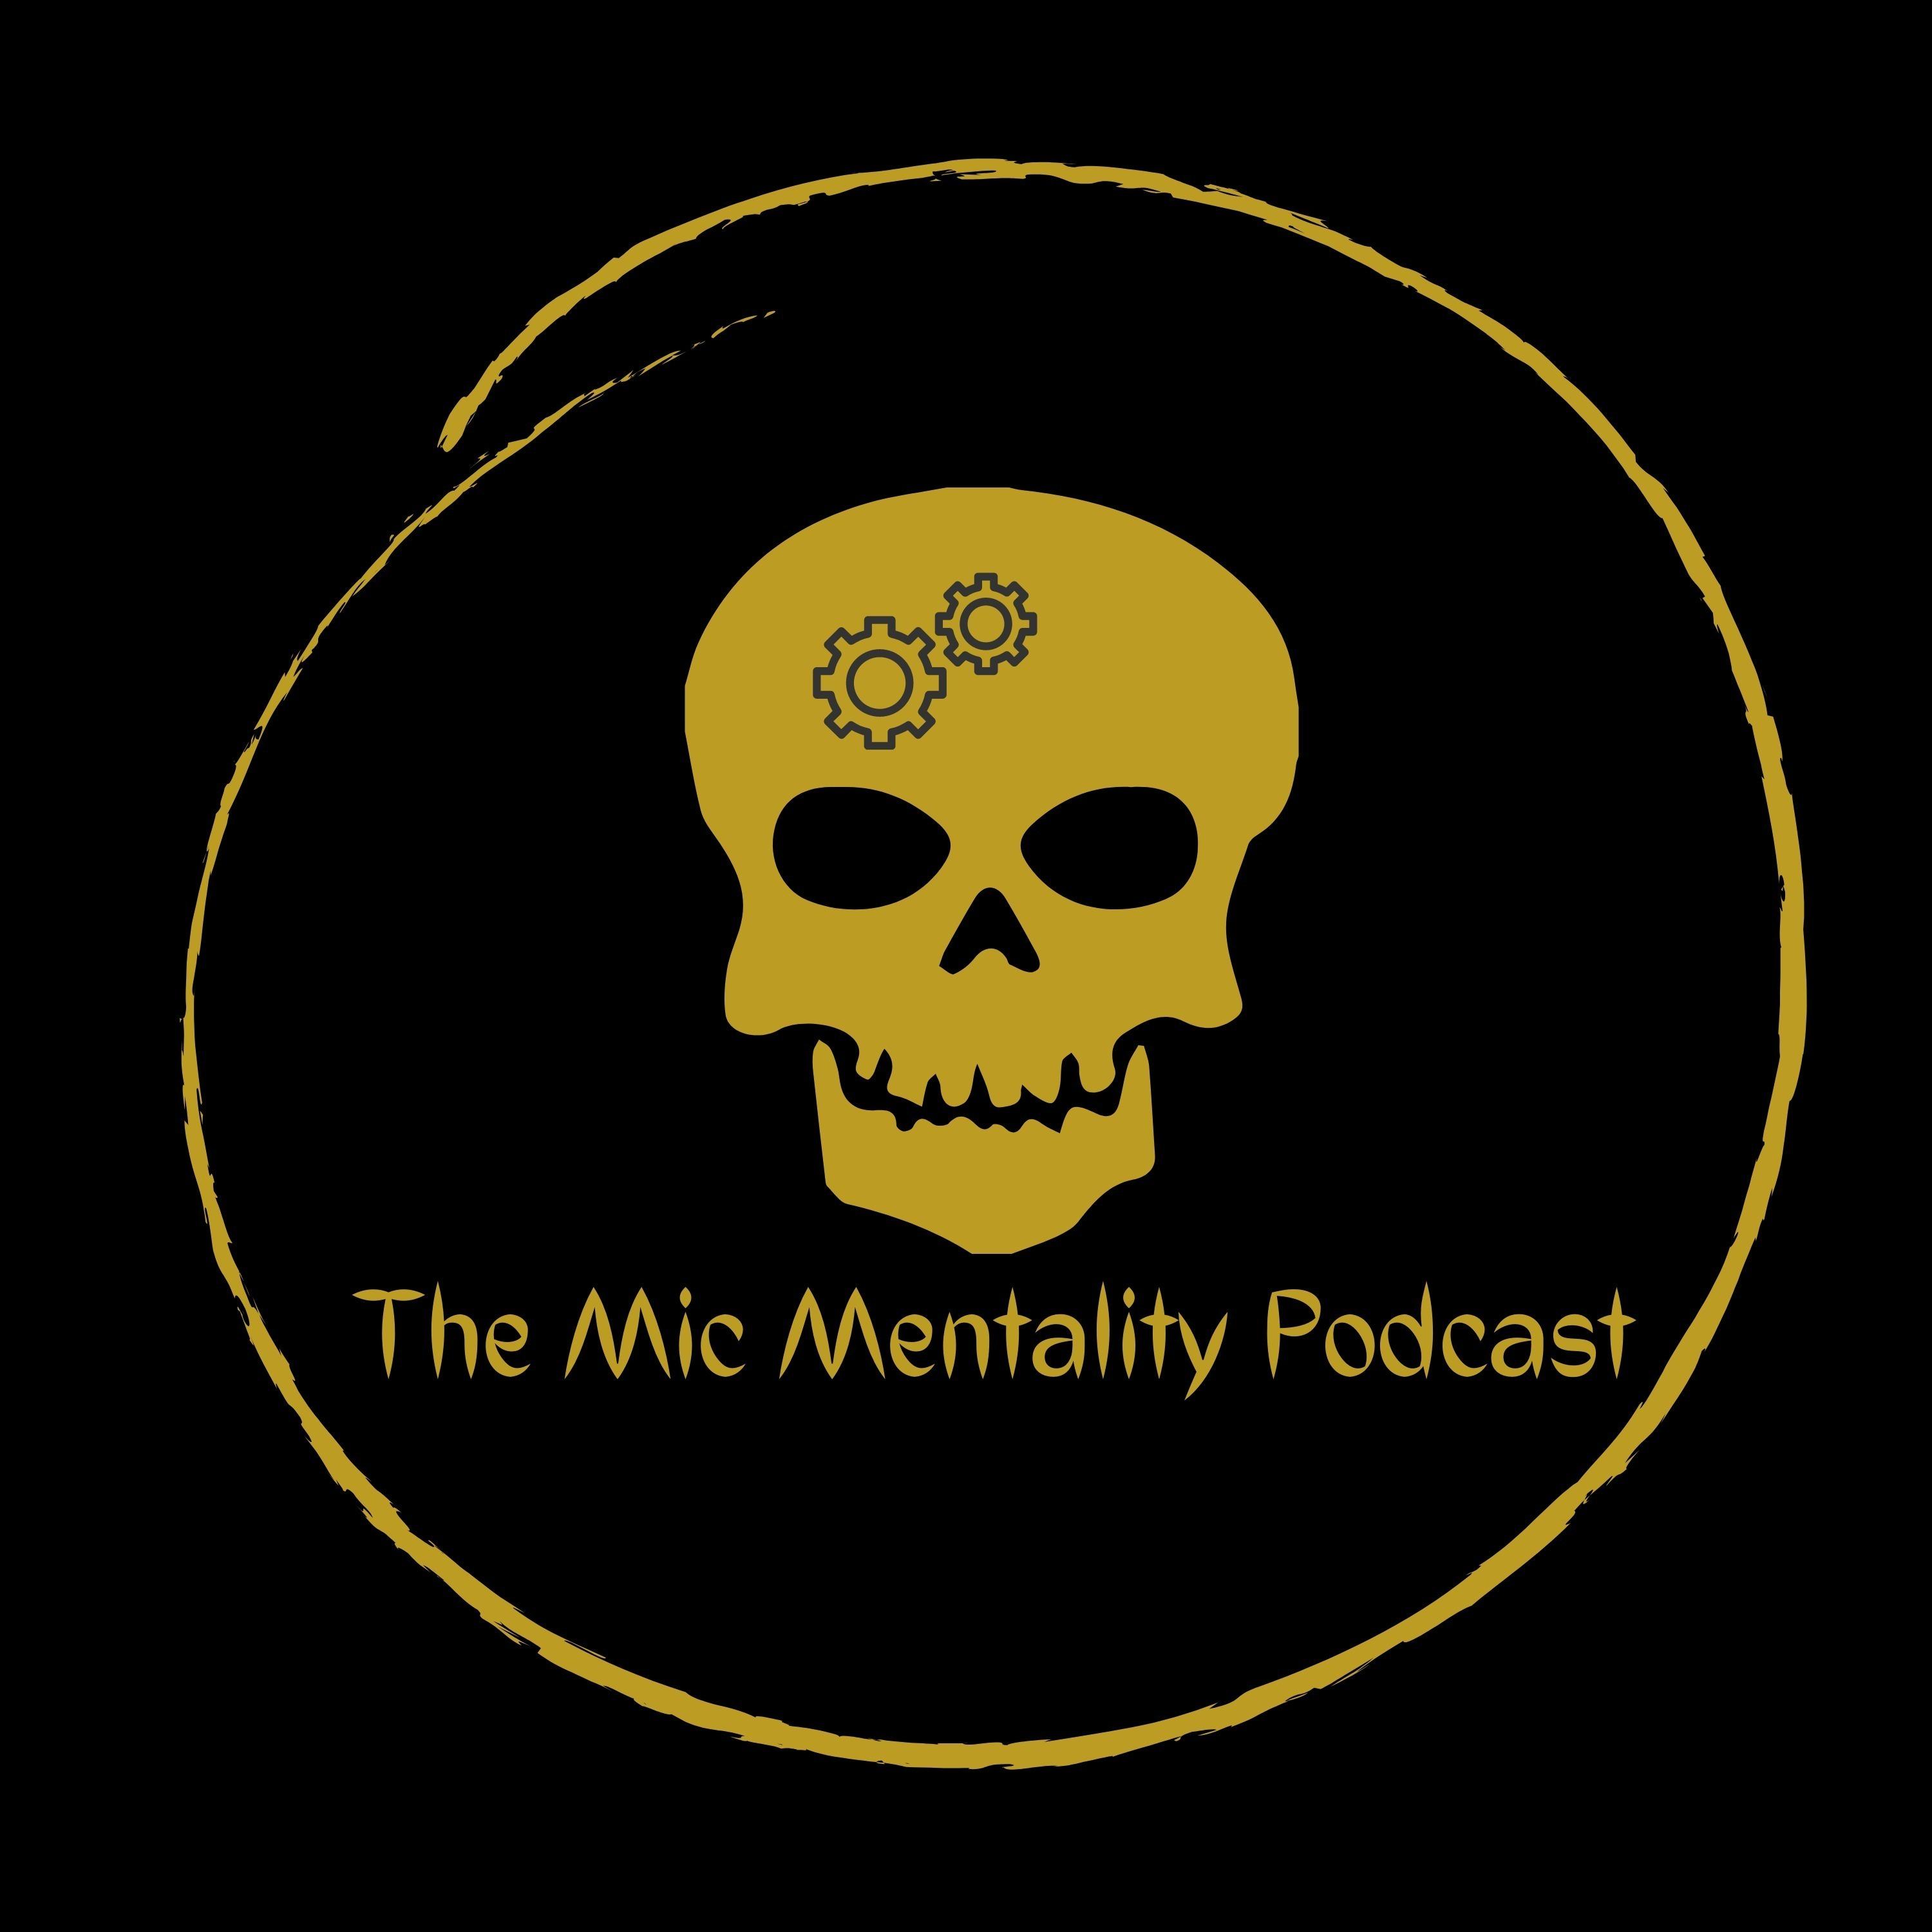 The Mic Mentality Podcast